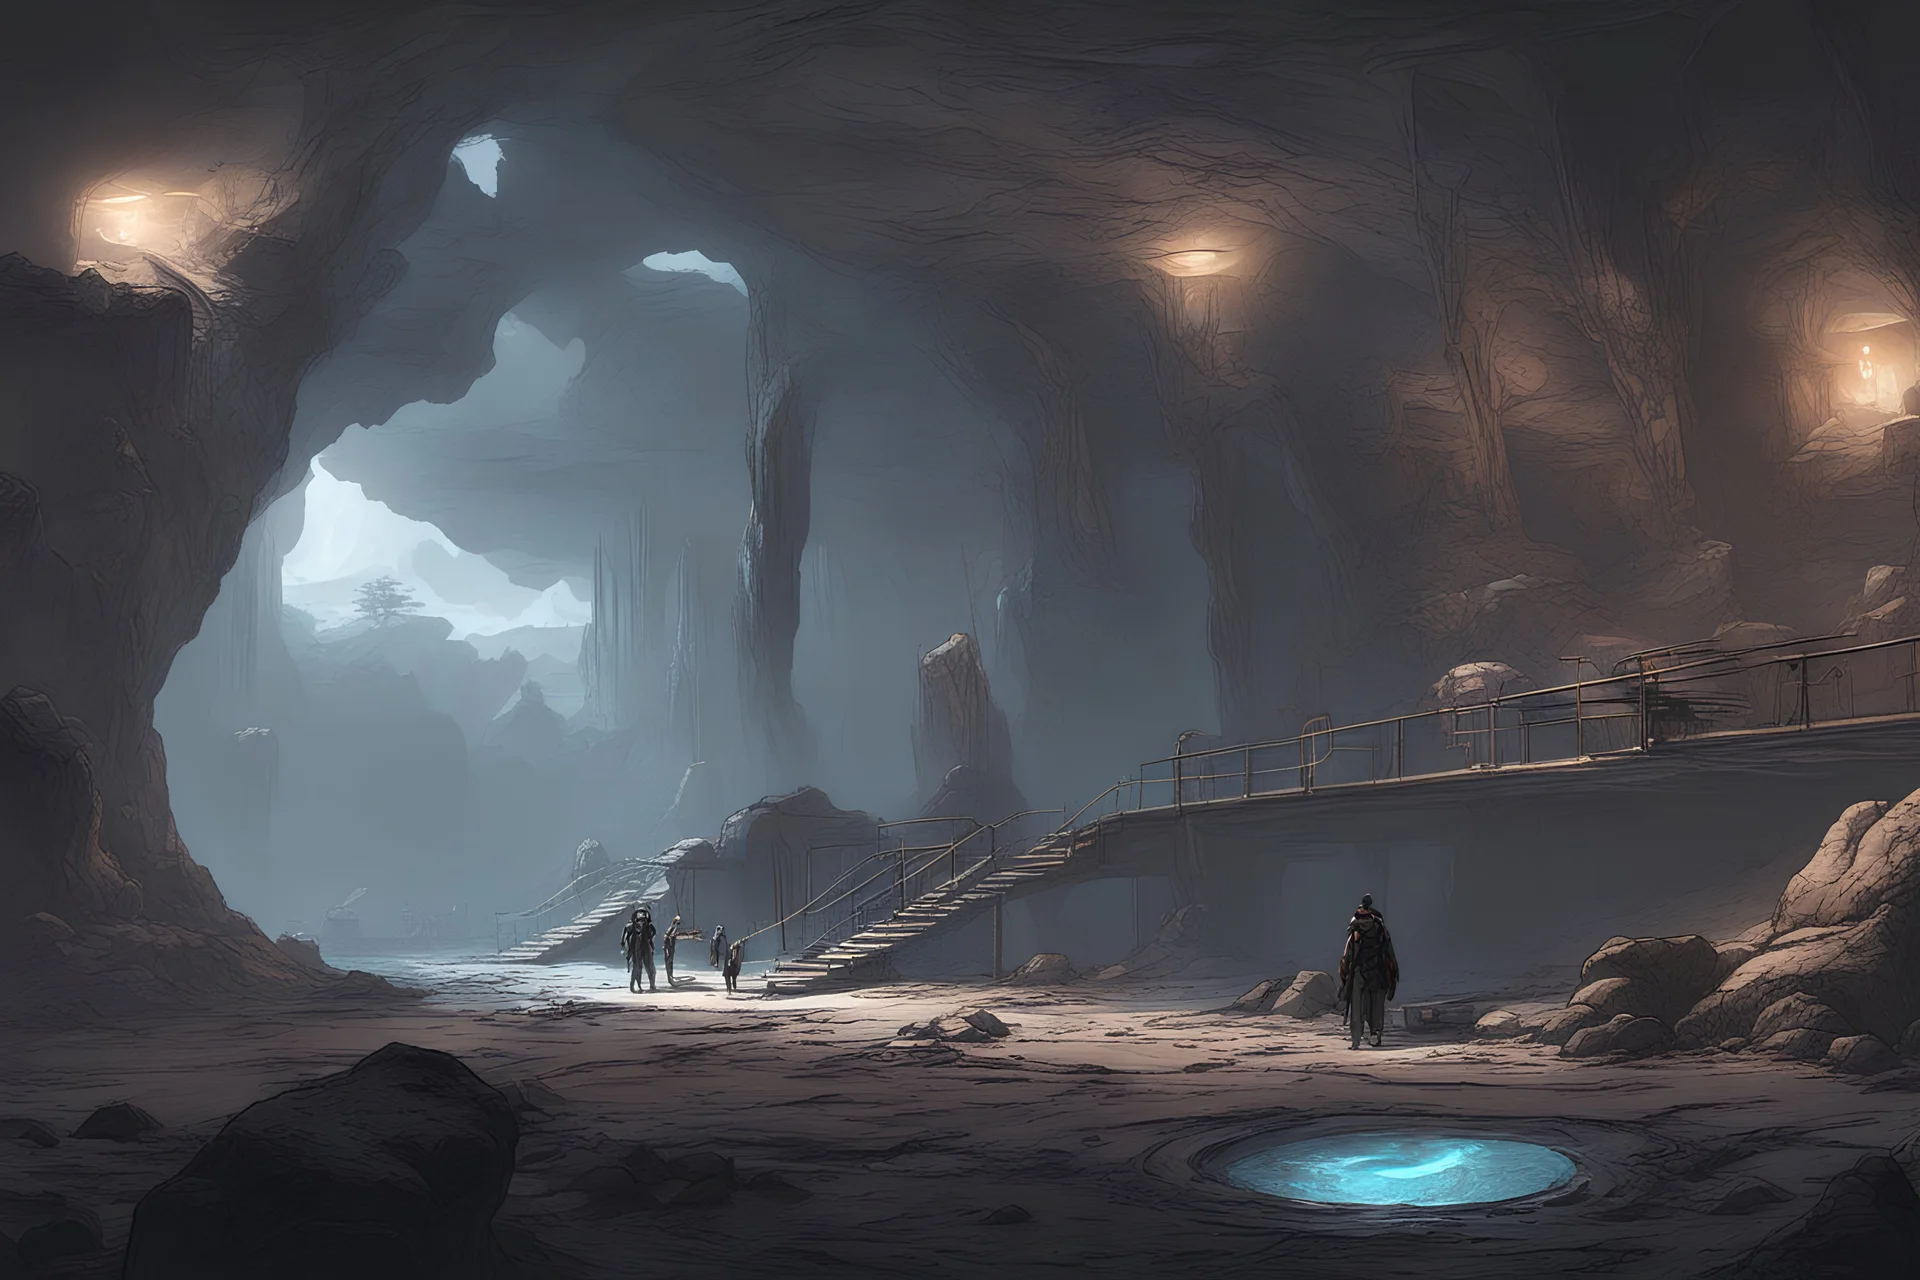 Concept art of an interior of a industrialize cave on a rocky planet